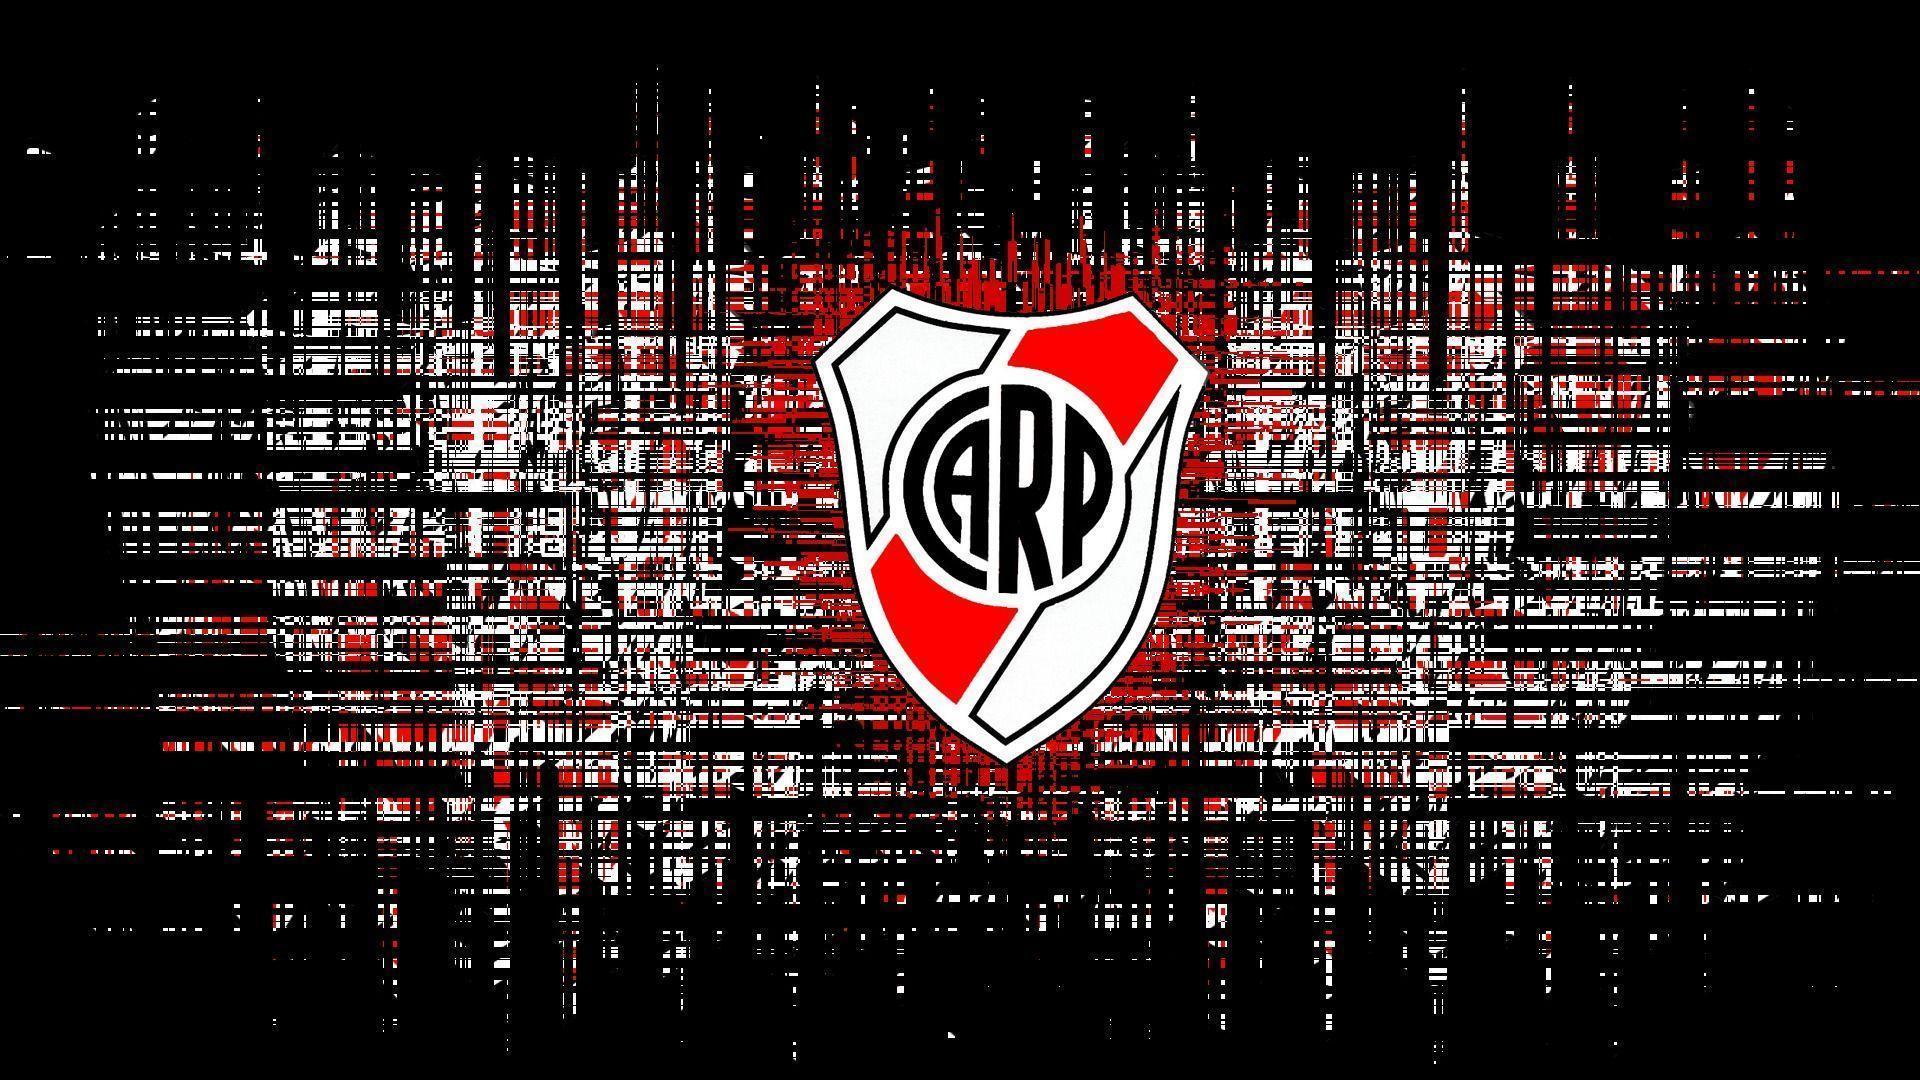 River Plate Wallpapers - Wallpaper Cave